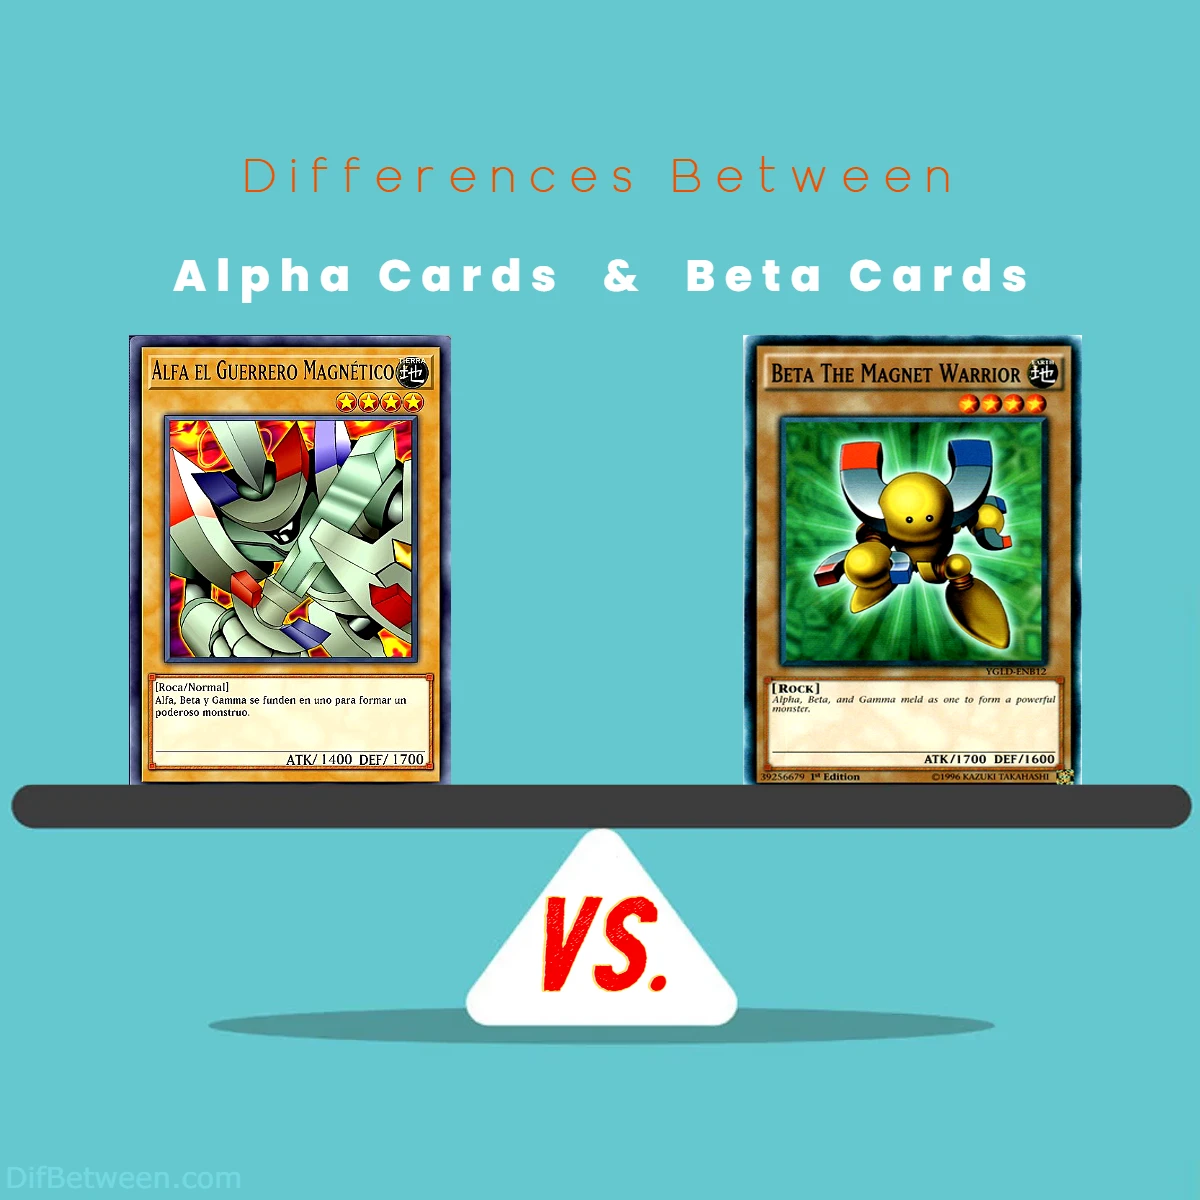 Differences Between Alpha Cards vs Beta Cards